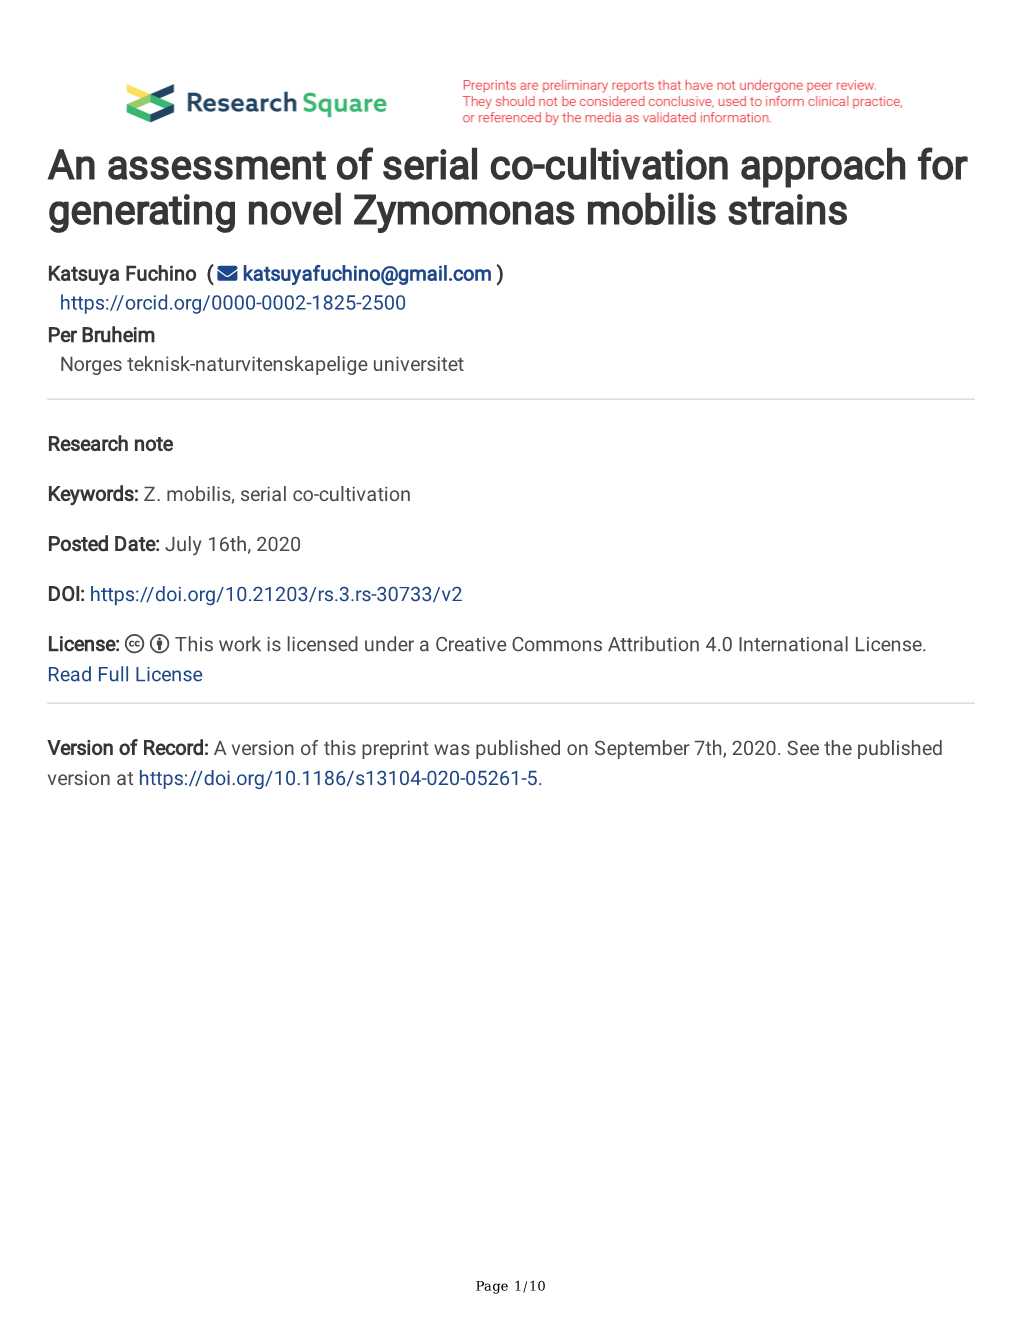 An Assessment of Serial Co-Cultivation Approach for Generating Novel Zymomonas Mobilis Strains